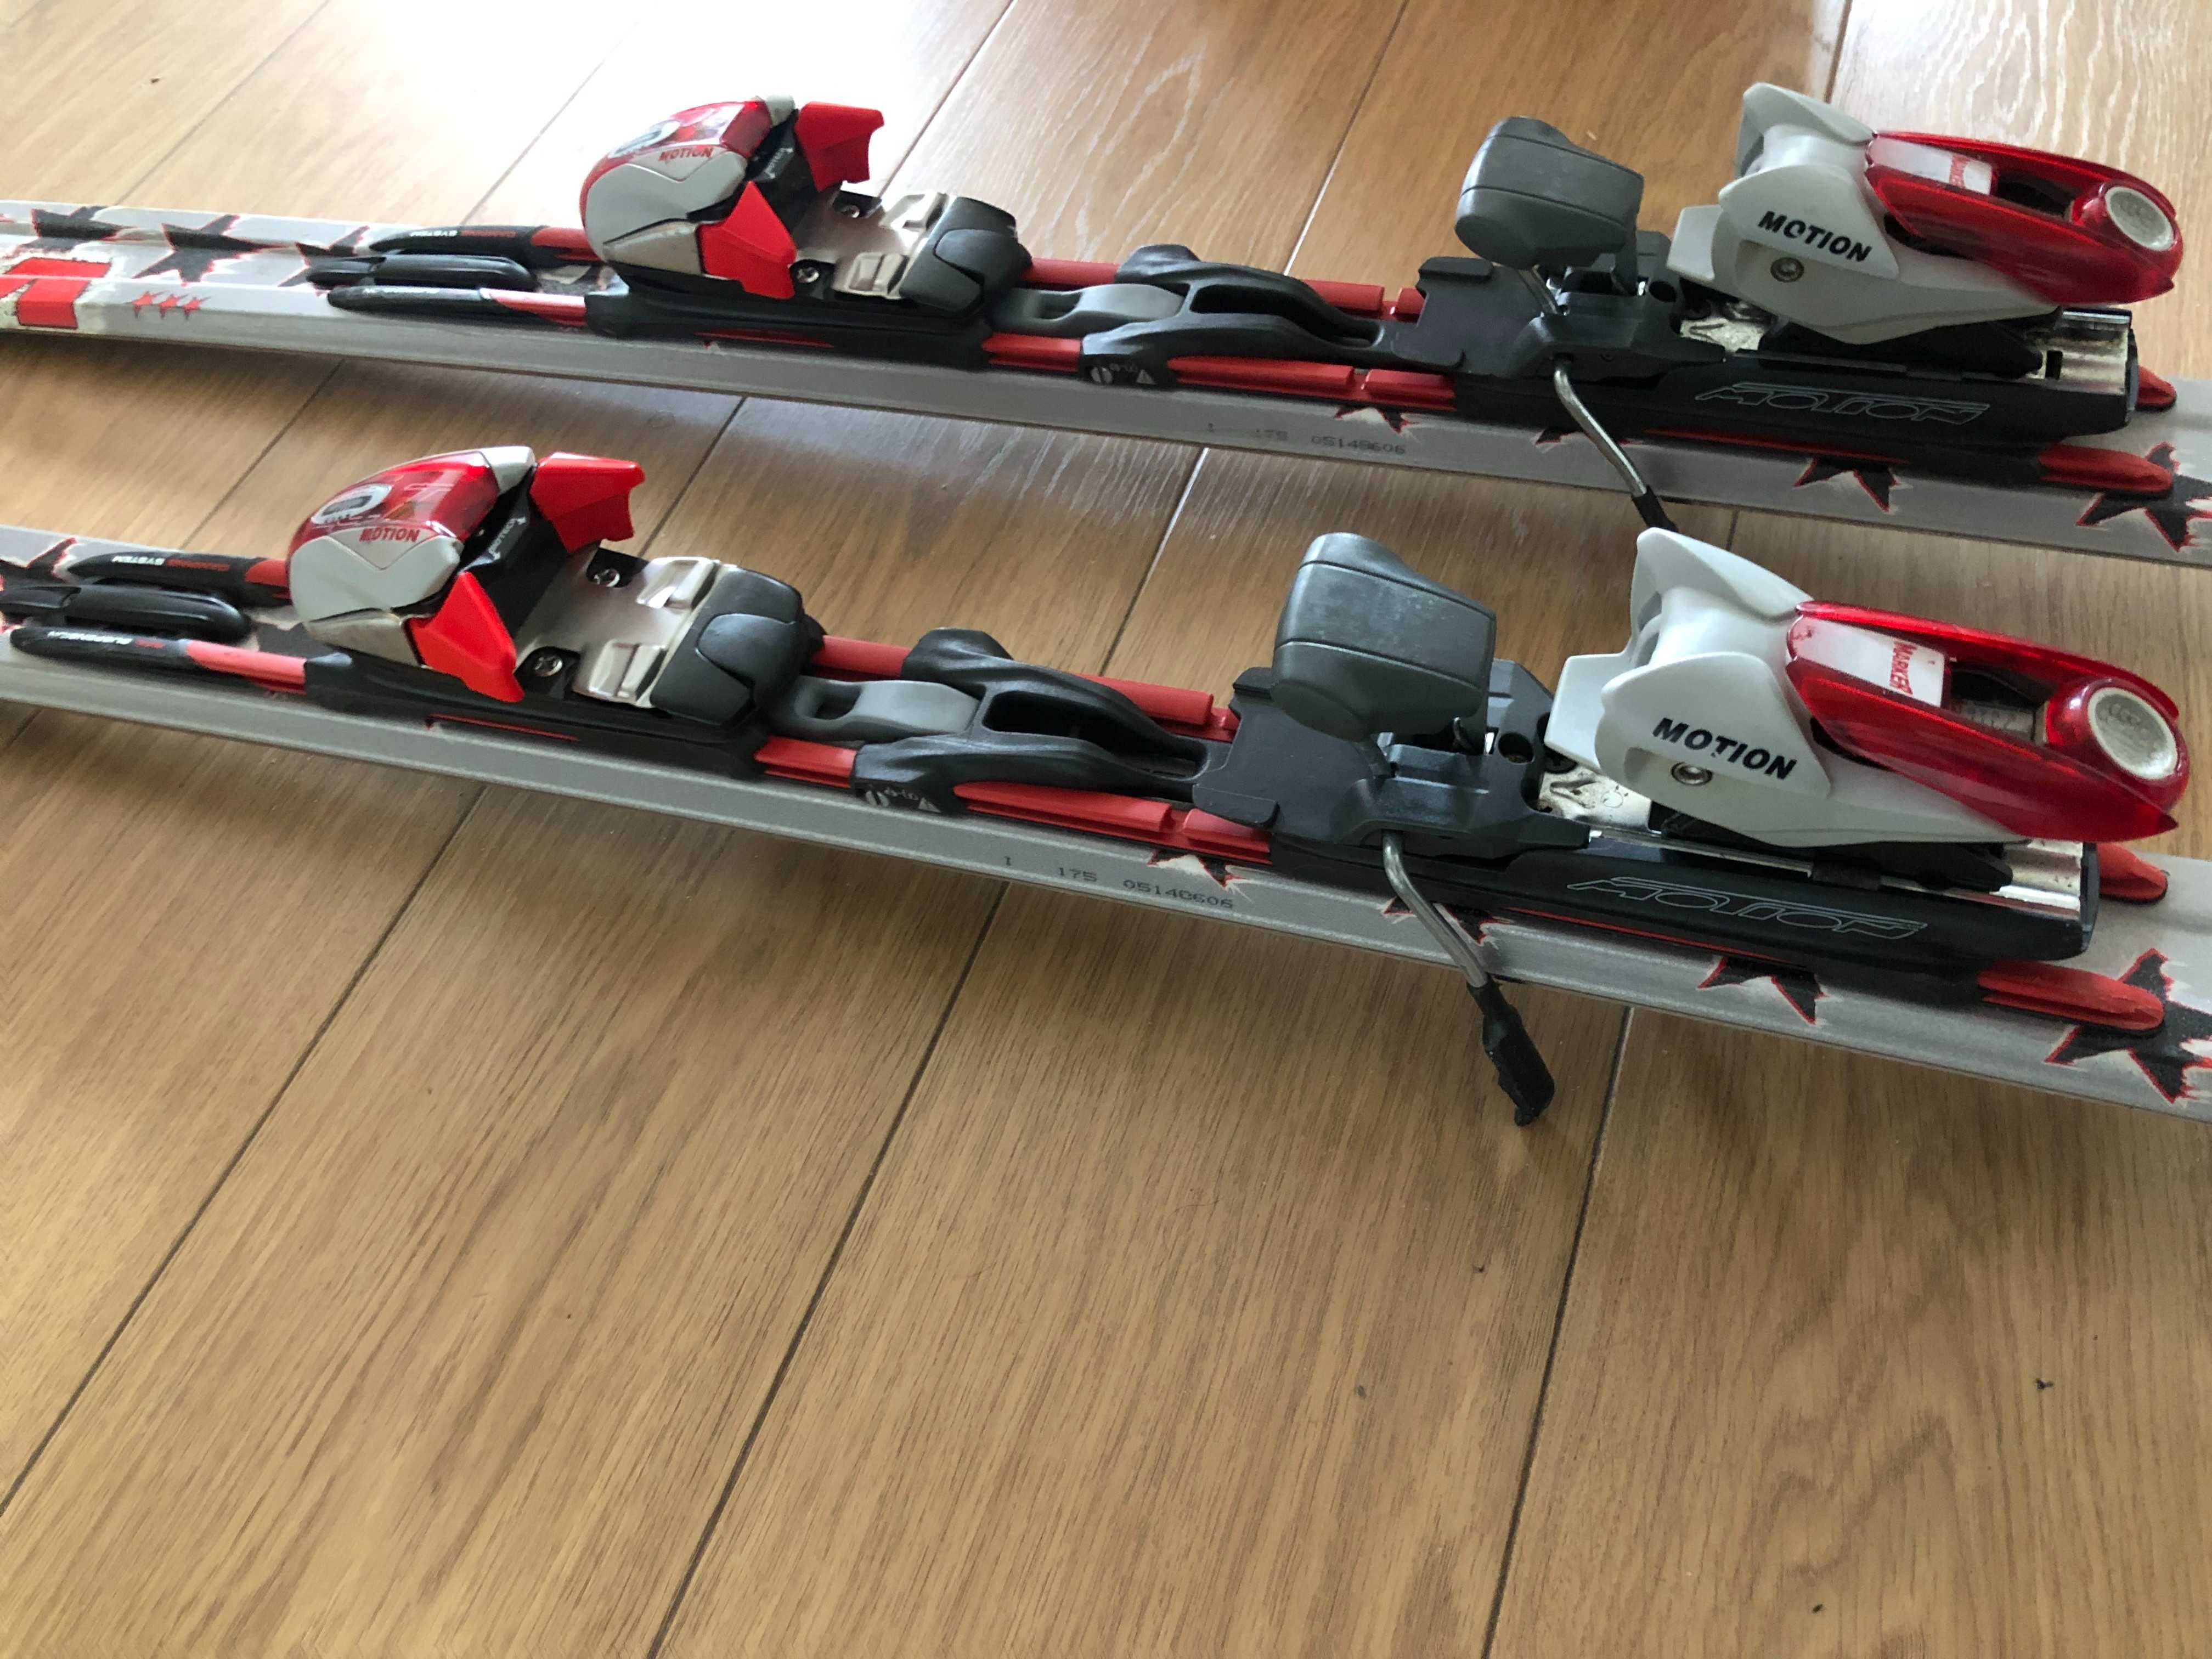 VÖLKL Men Skis with Bindings – Perfect Condition! Great Bargain!